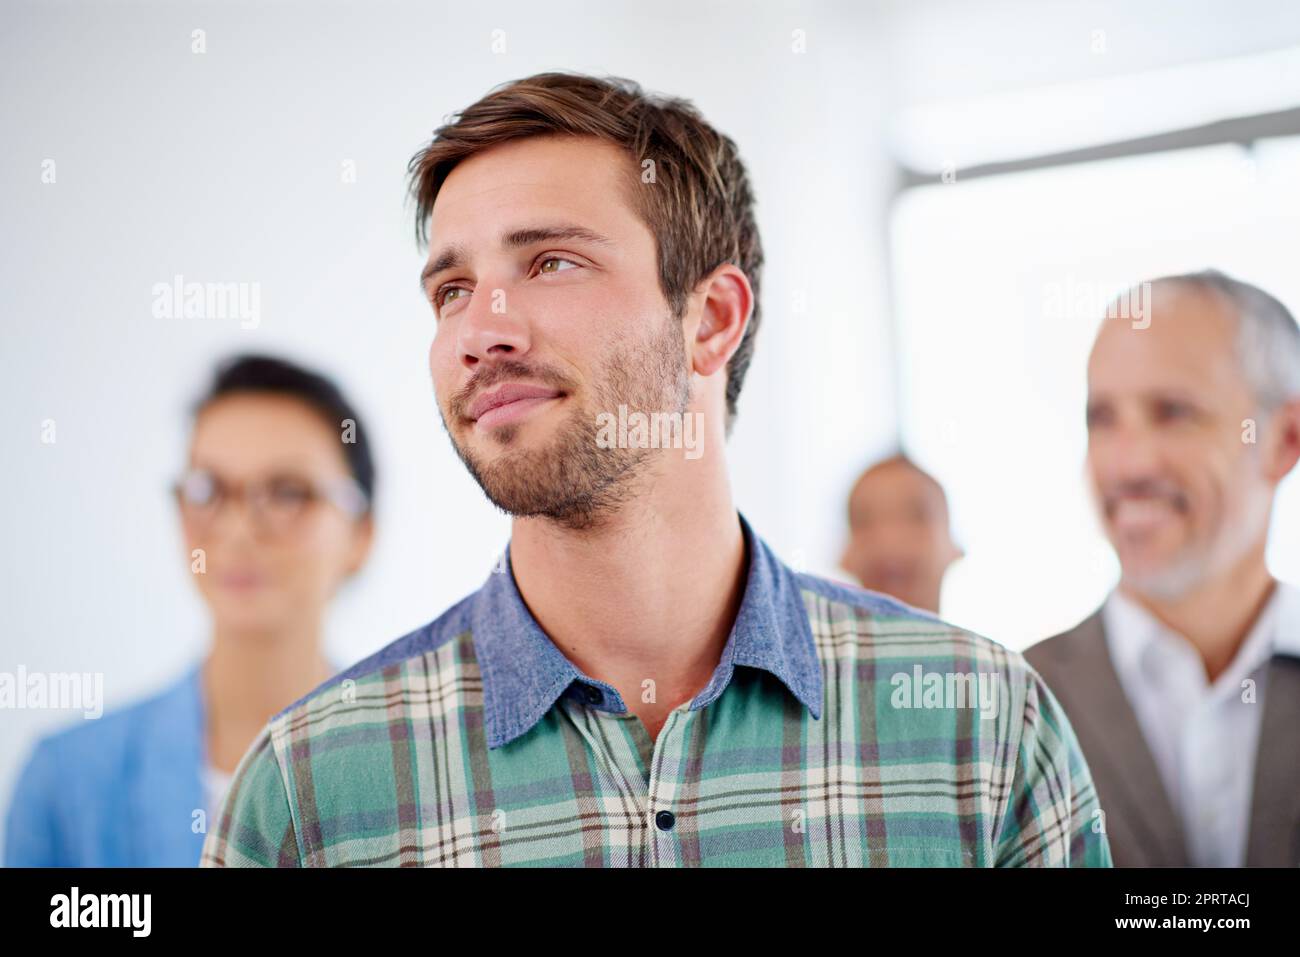 The futures looking promising. Young man looking away with coworkers in the background. Stock Photo